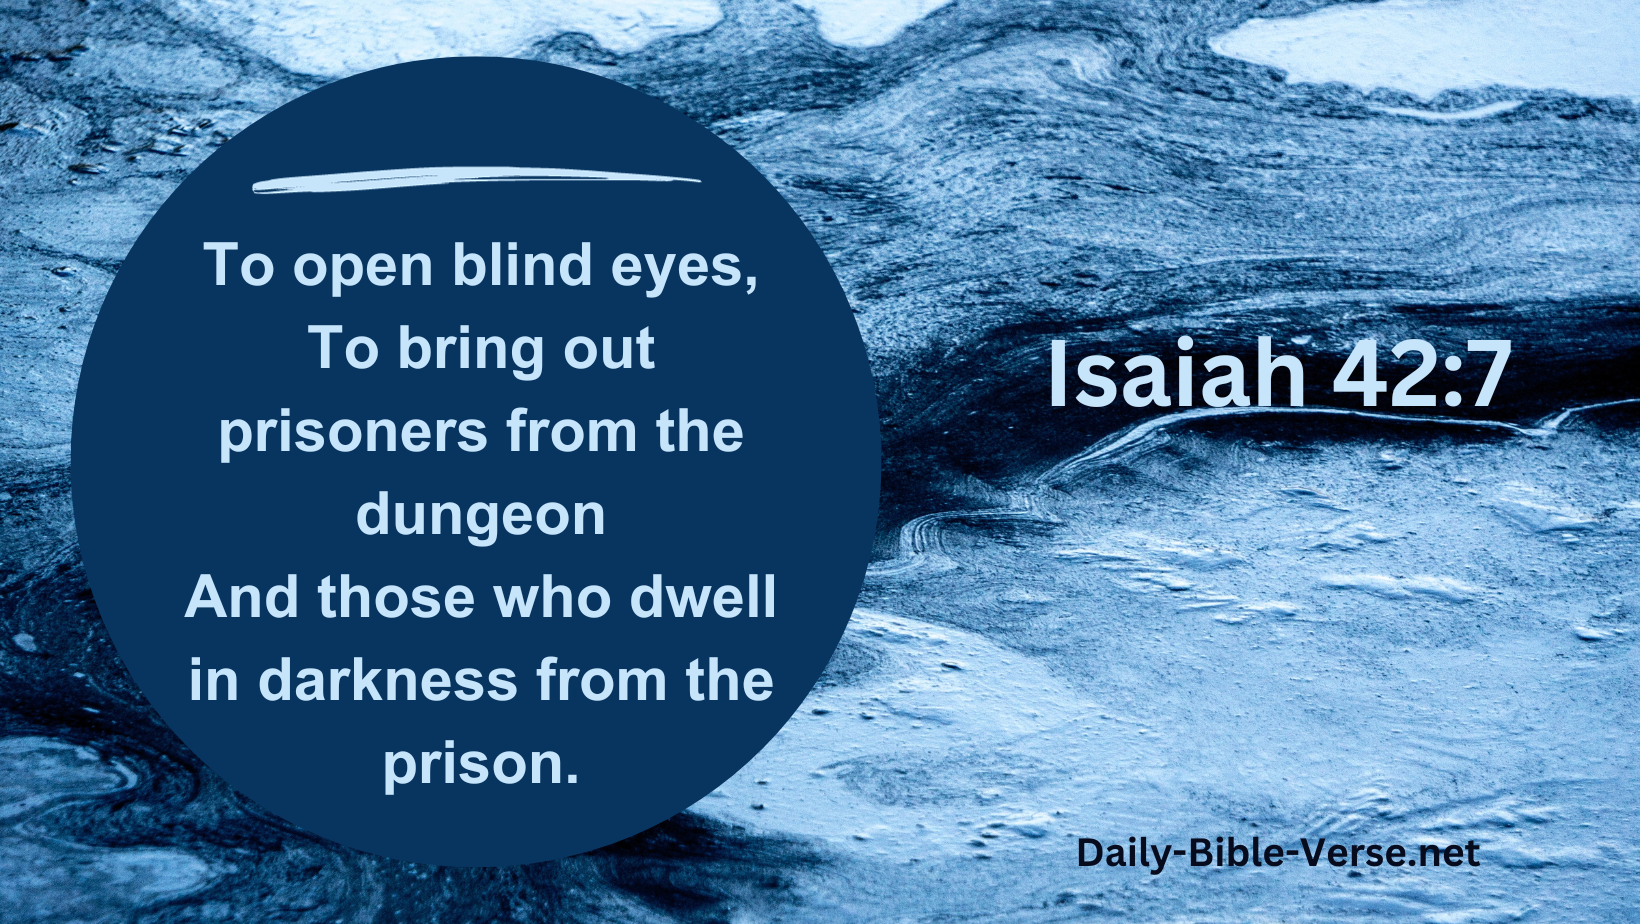 To open blind eyes, To bring out prisoners from the dungeon And those who dwell in darkness from the prison.